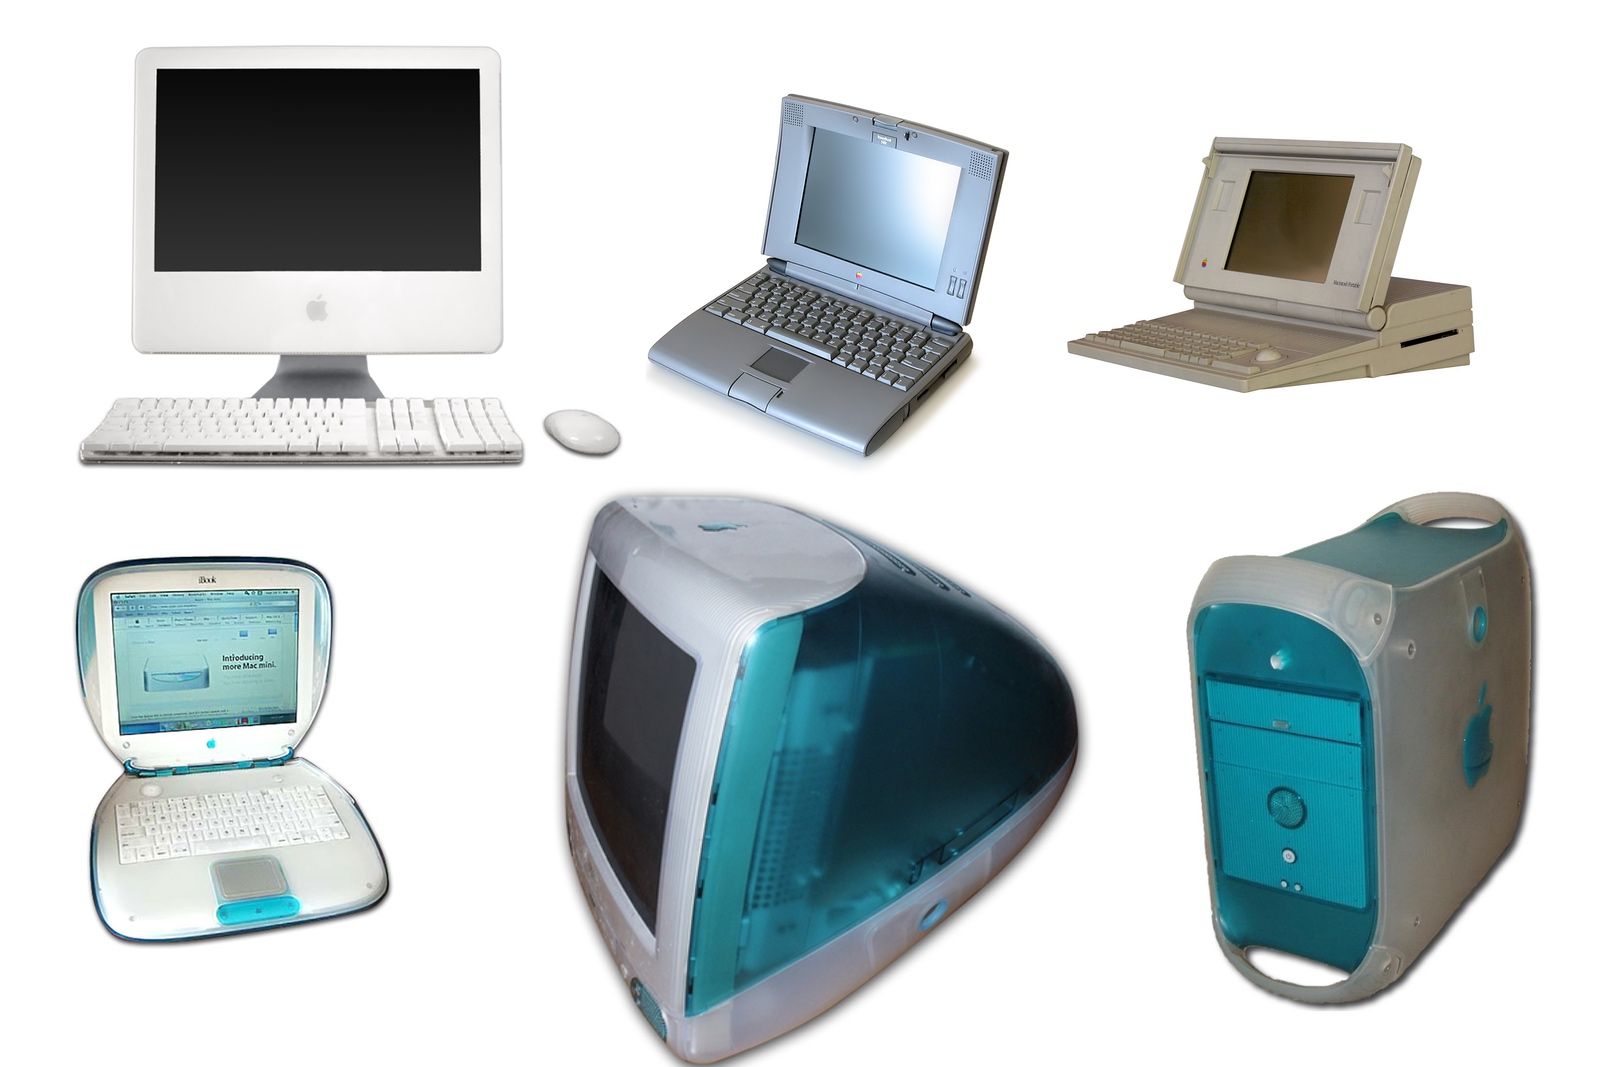 history of apple computers